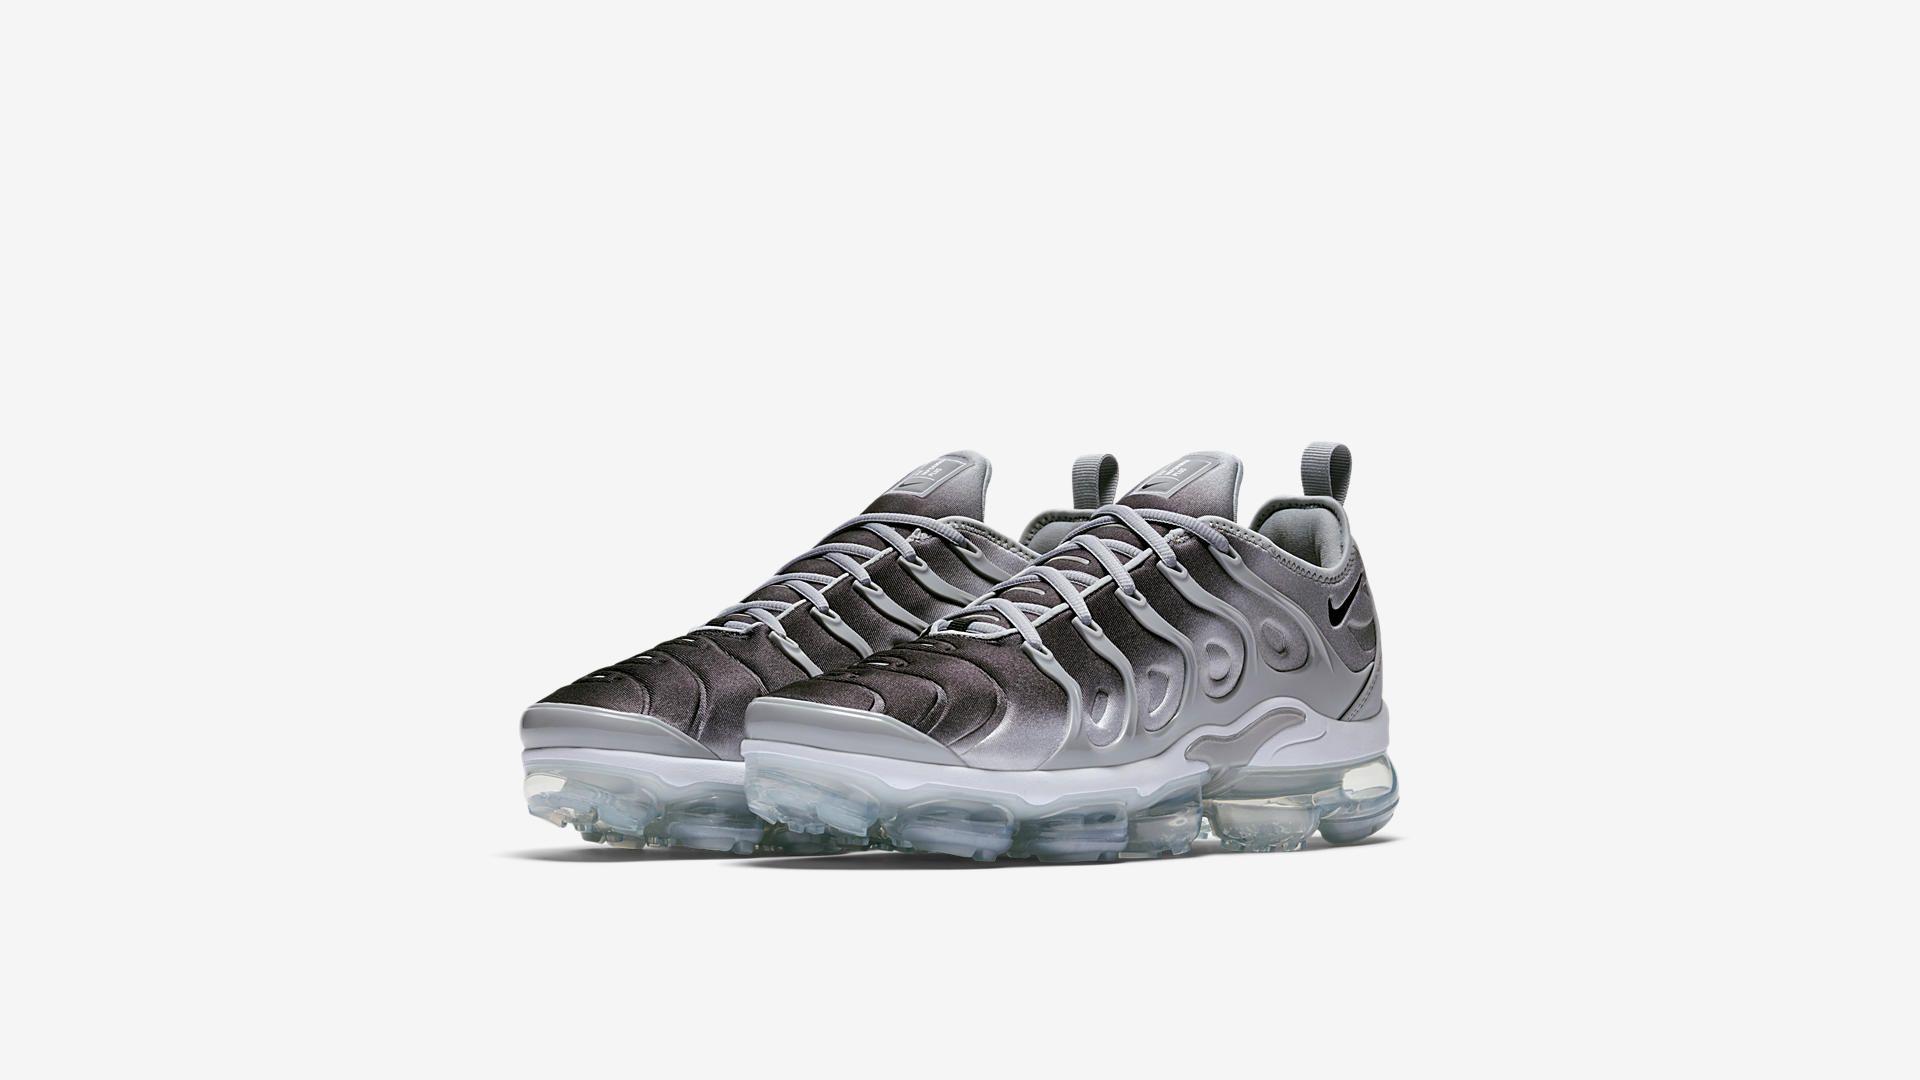 Nike Air VaporMax Plus Dropping in Three Colorways